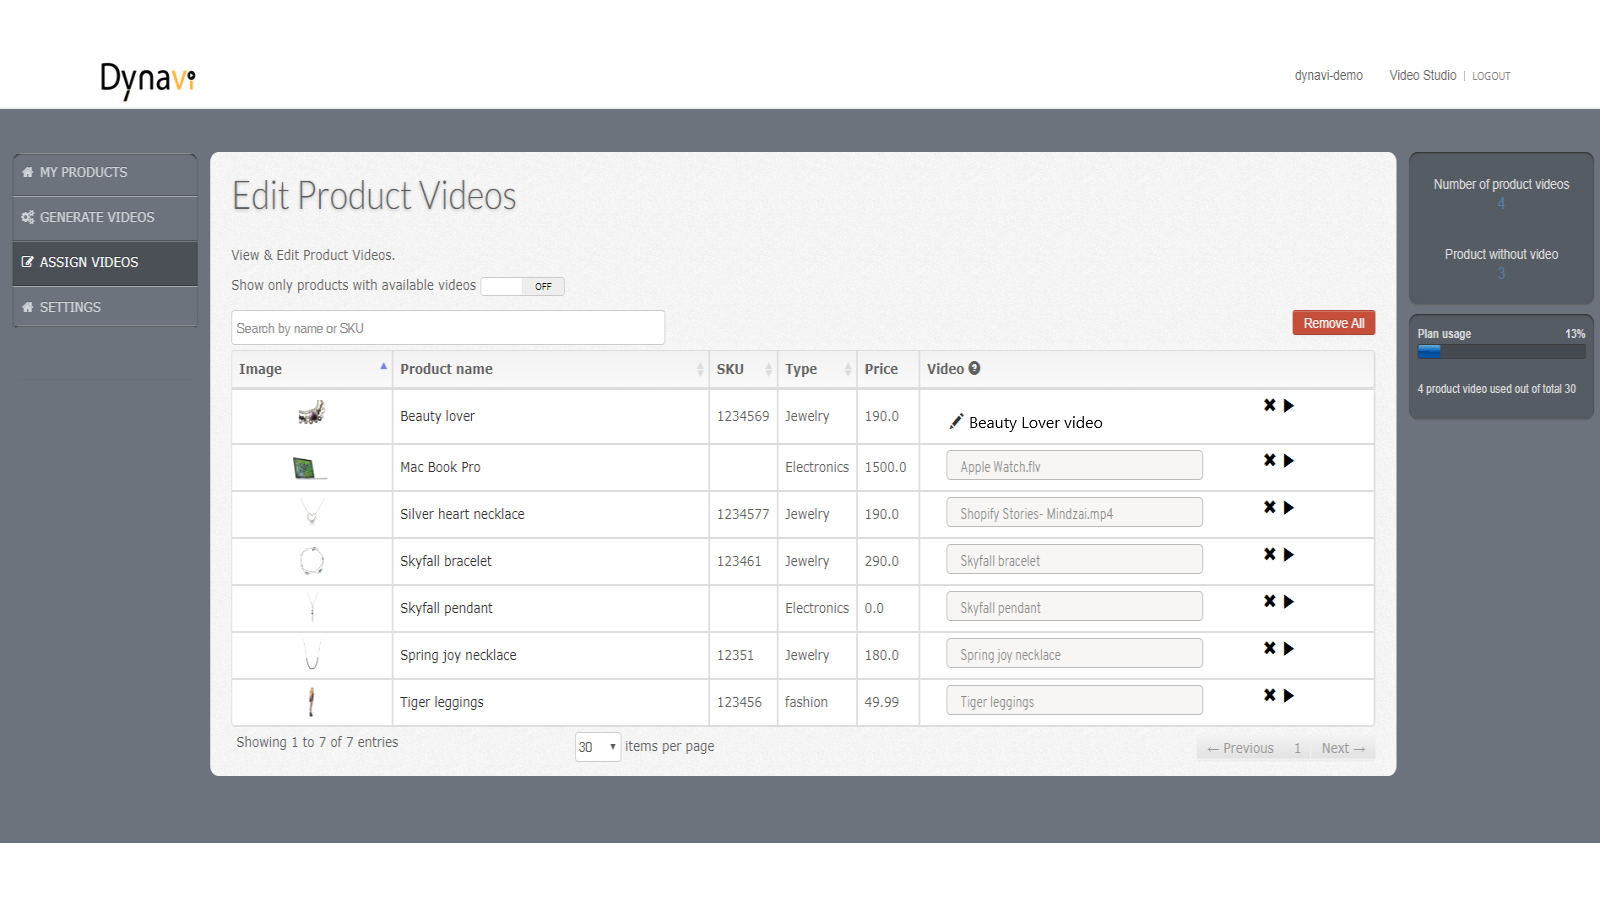 Assign videos to product